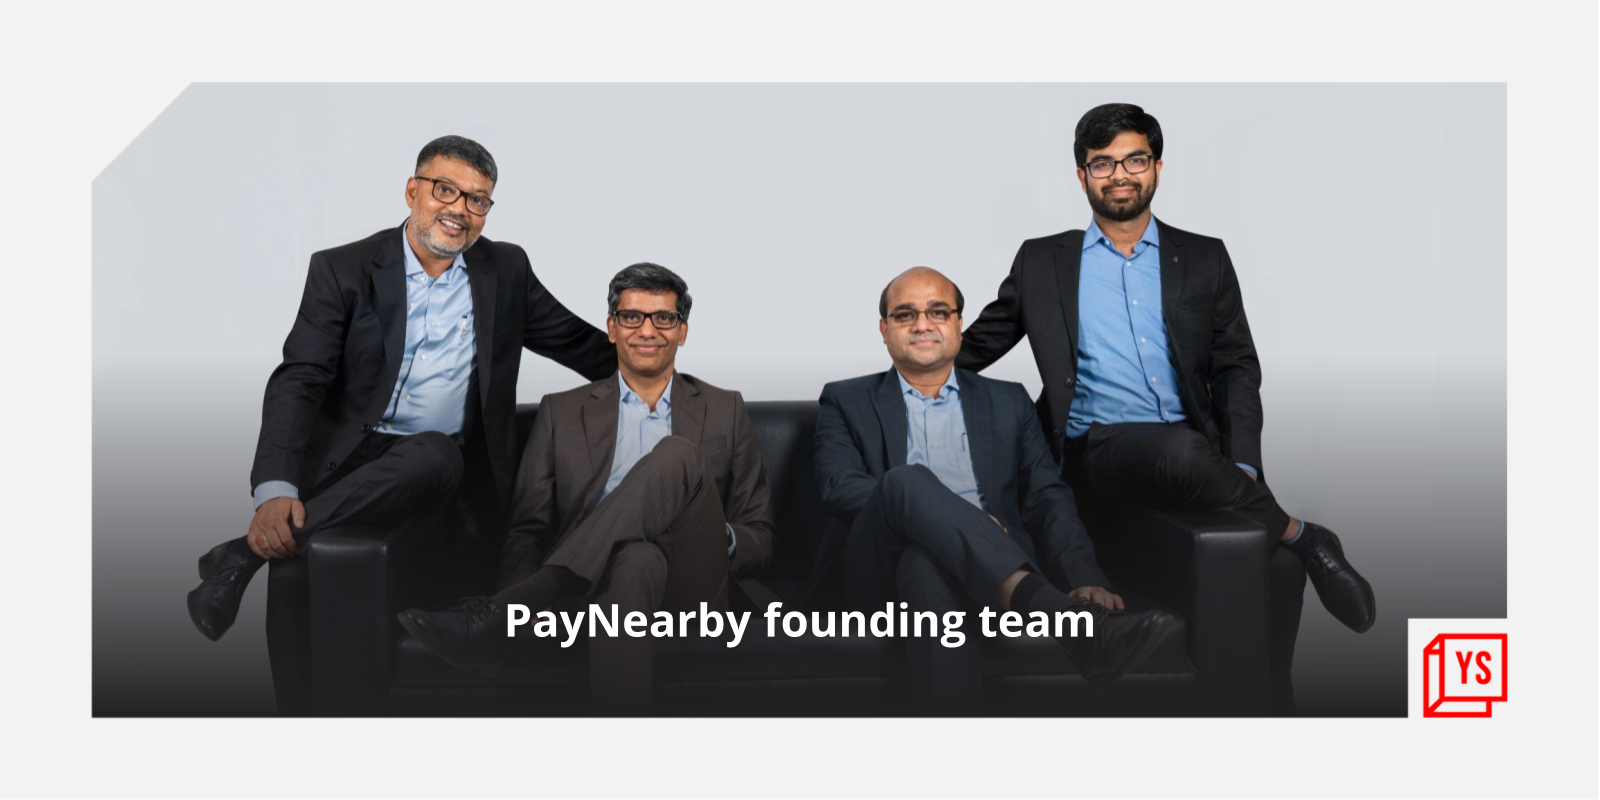 From Sela Pass at 13,700 ft to Raichur: How PayNearby enables financial inclusion by tying up with kiranas